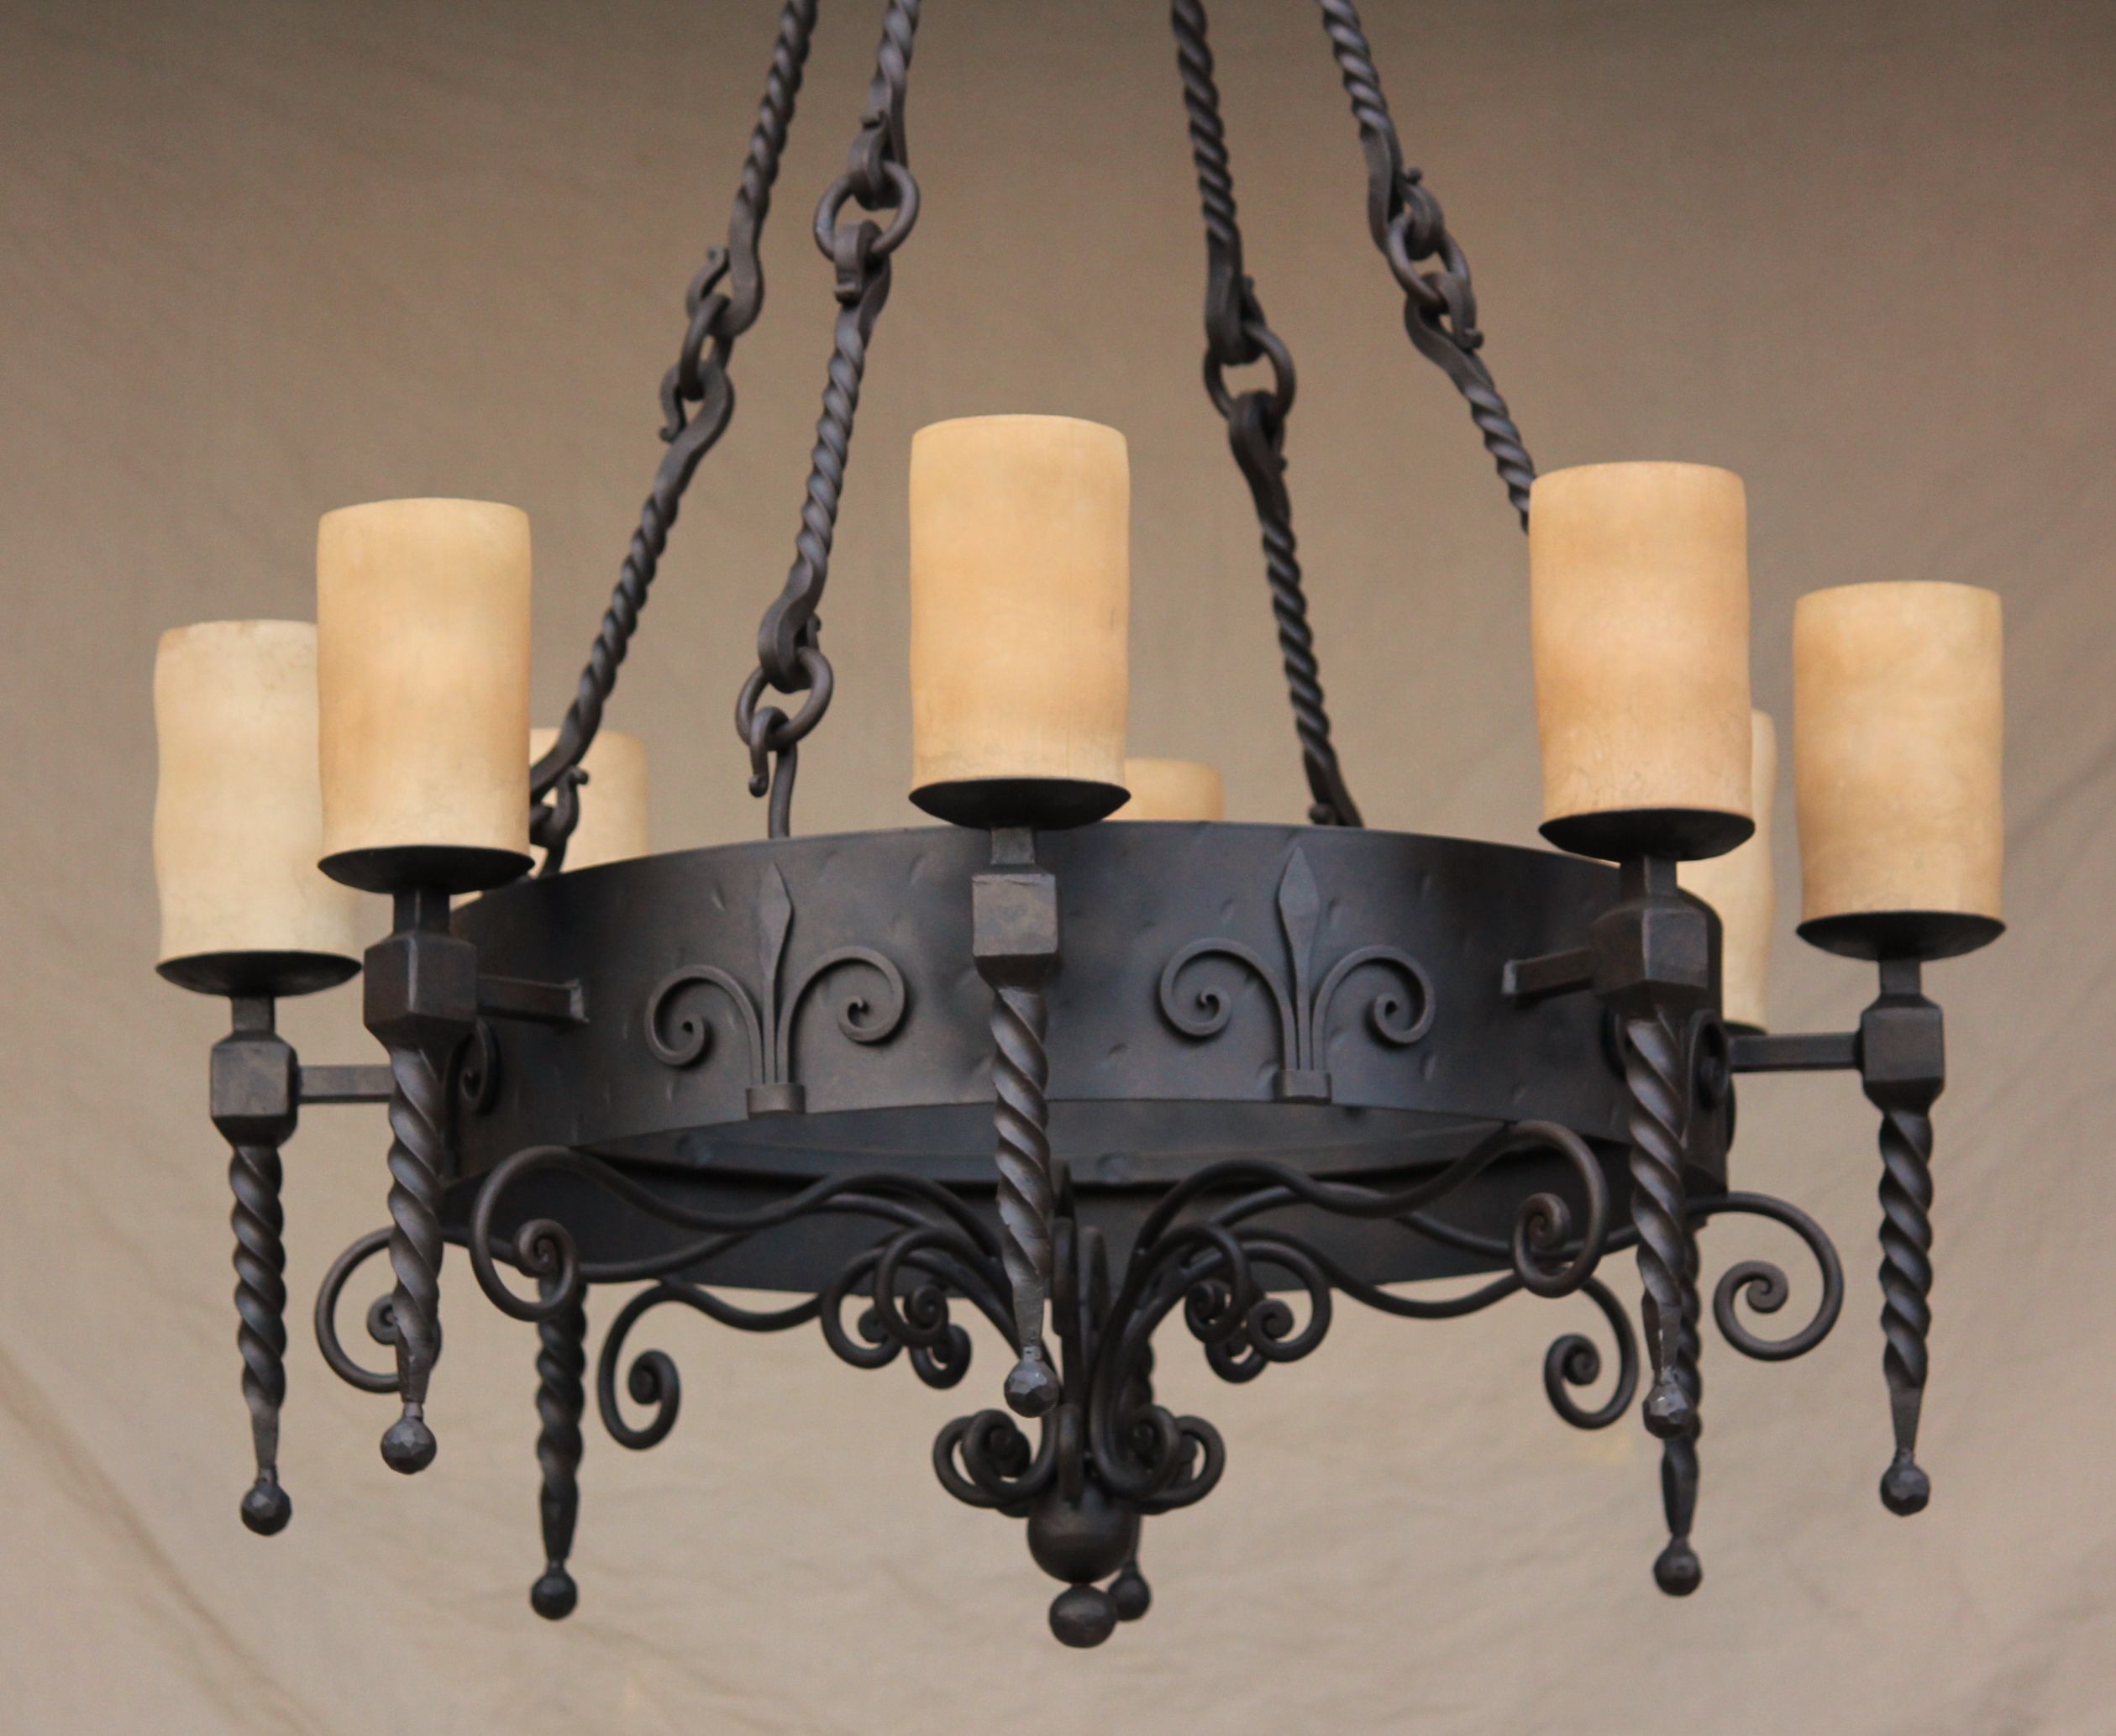 Lights of Tuscany 12208 Tuscan/Mediterranean Style Iron Chandelier